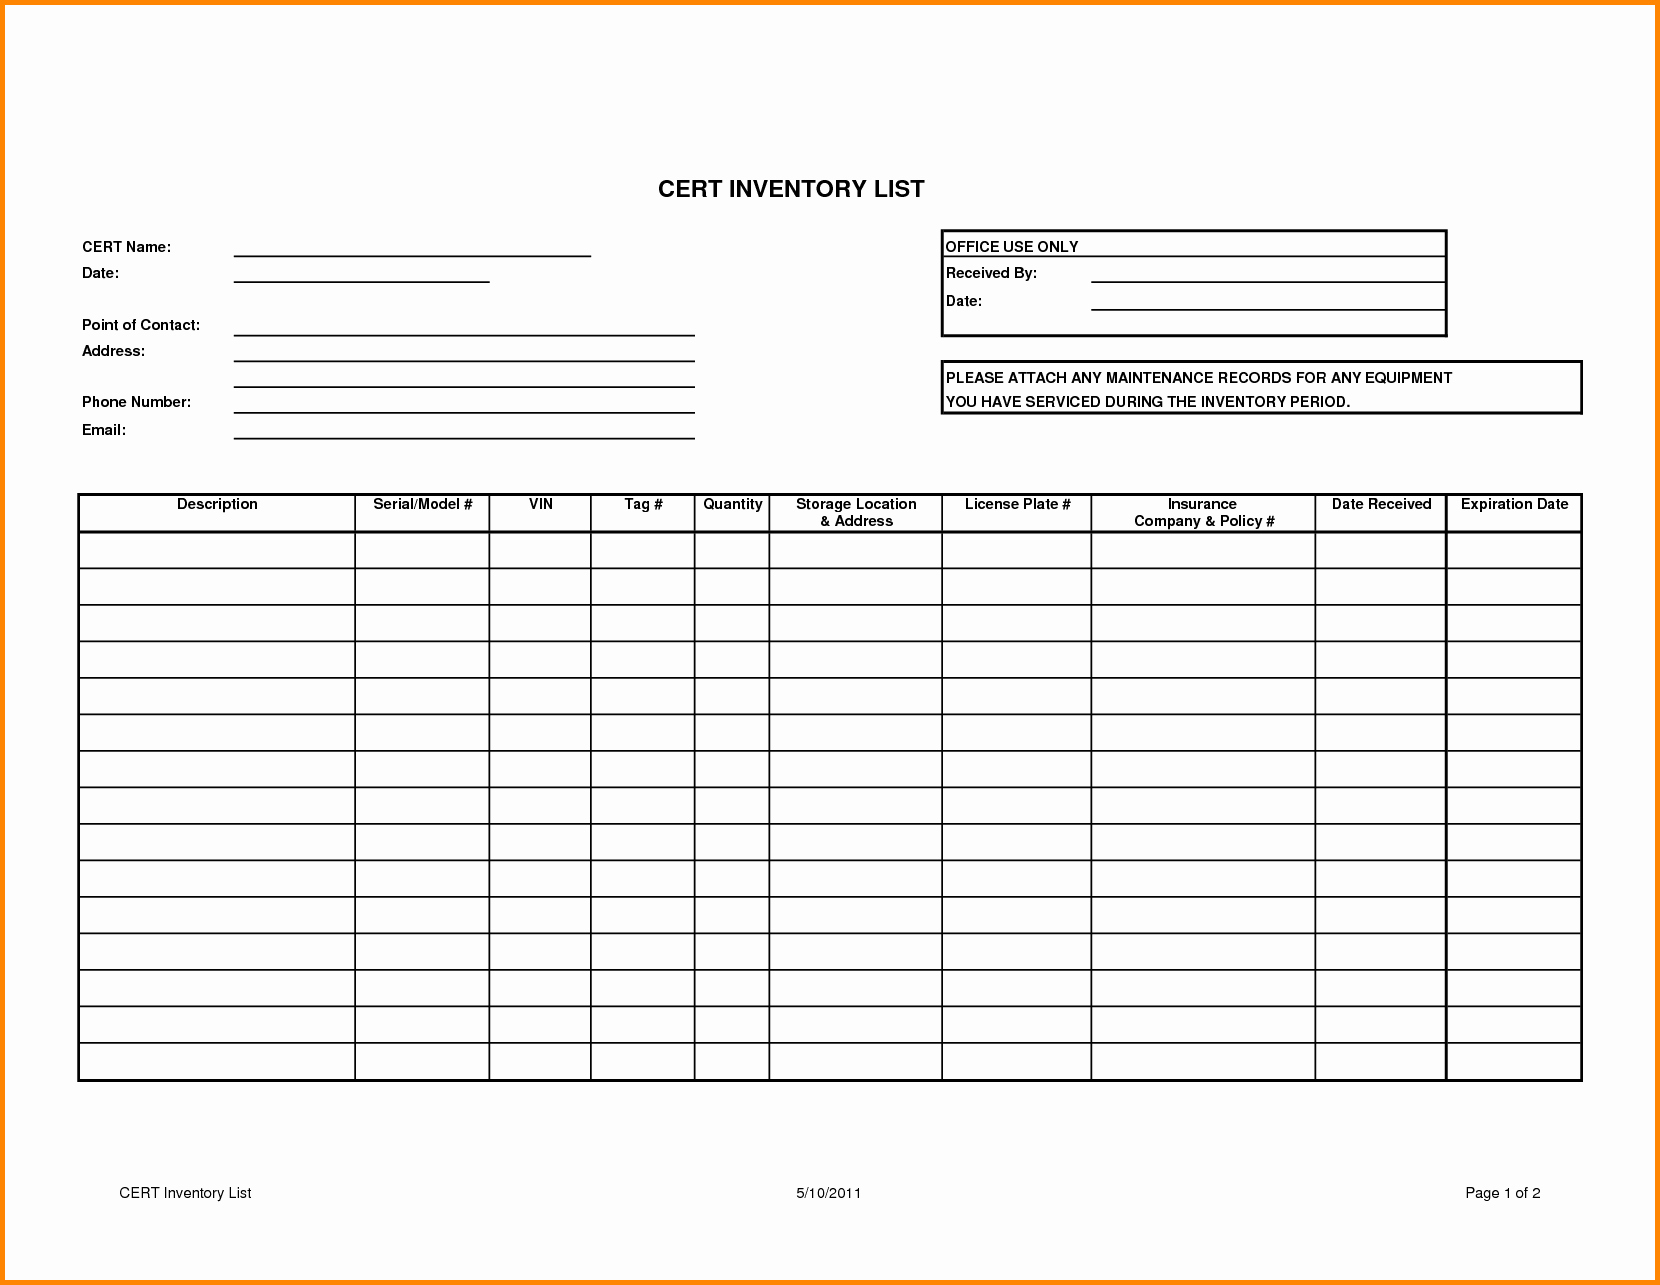 20 Inventory For Small Business Free – Guiaubuntupt - Free Printable Inventory Sheets Business